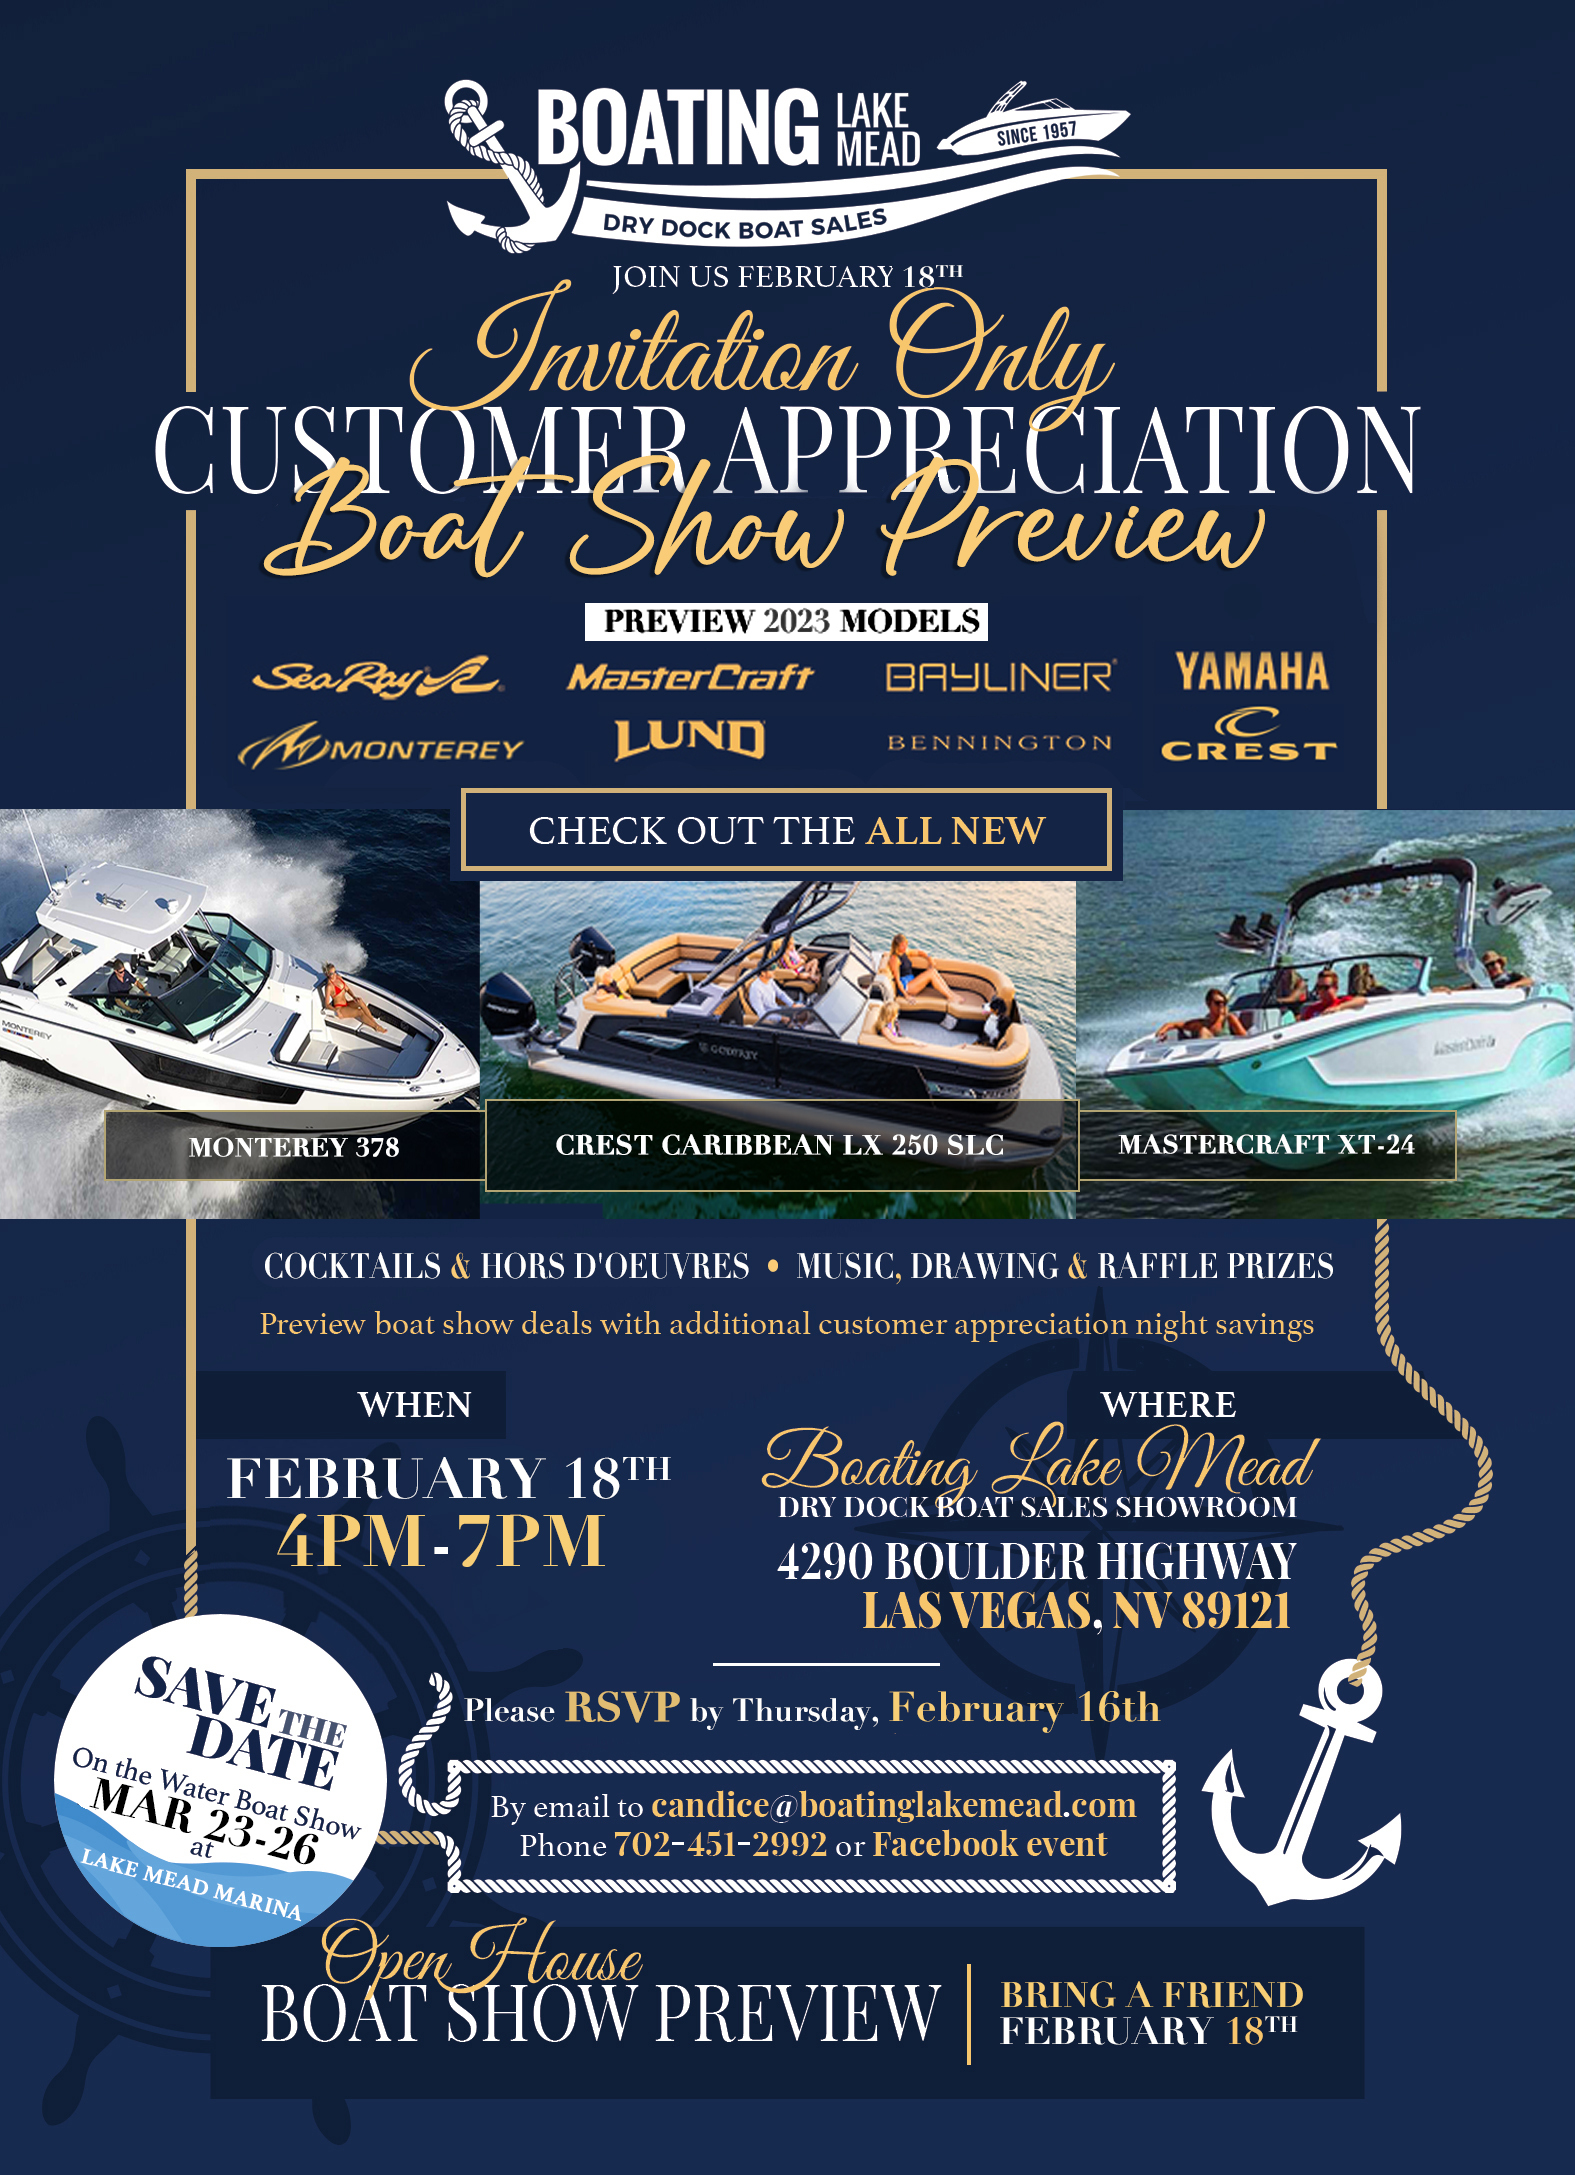 BLM cocktail party boat show preview